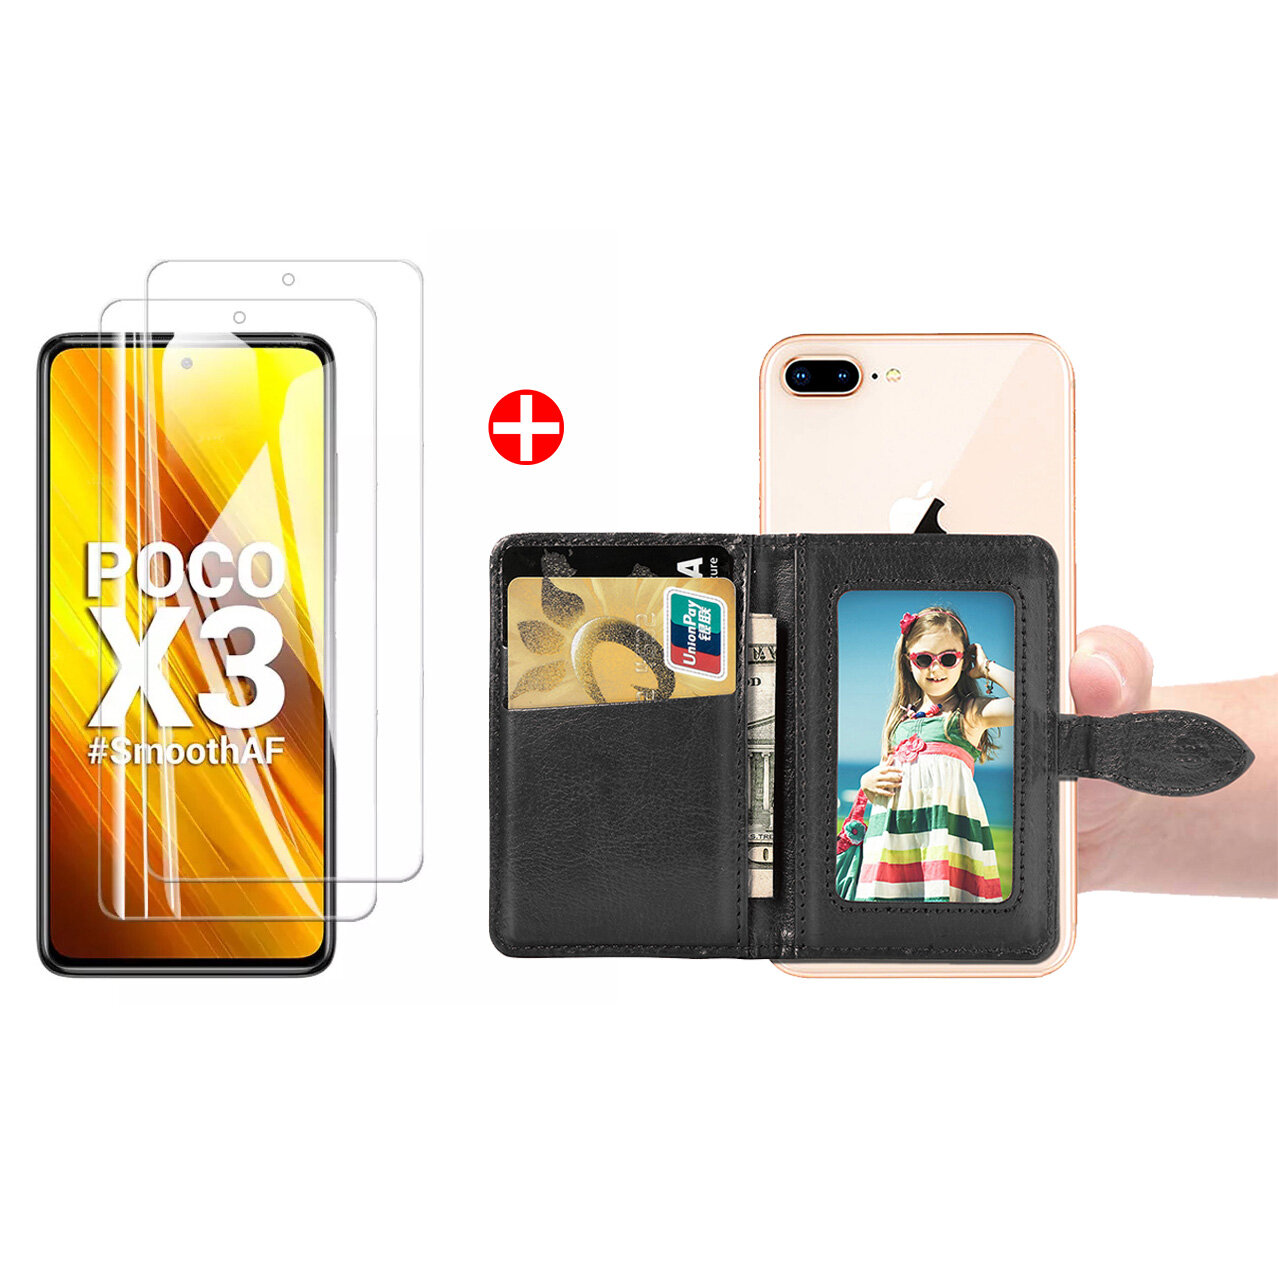 

Bakeey 2PCS for POCO X3 PRO / POCO X3 NFC Tempered Glass Screen Protector + 1PC Magnetic Flip PU Leather Credit Card Hol